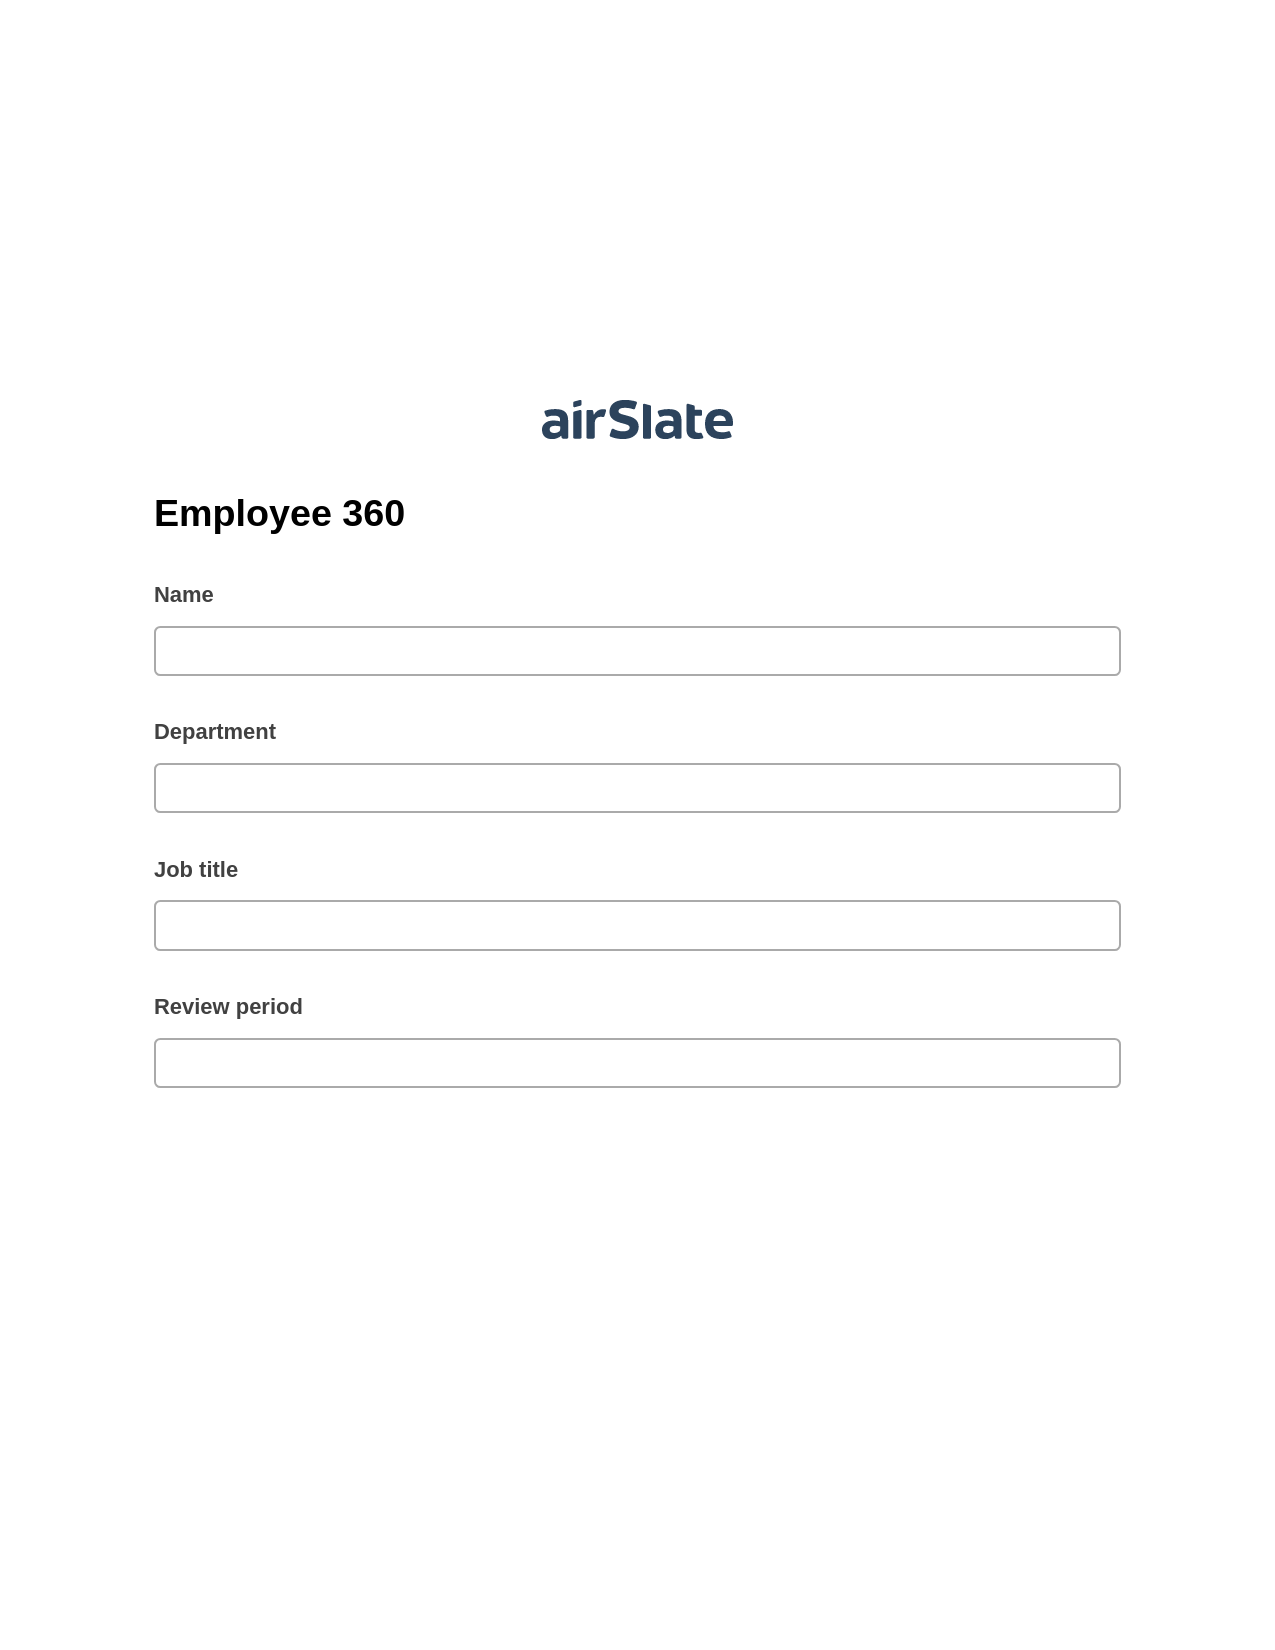 Employee 360 Pre-fill from MySQL Bot, Export to MS Dynamics 365 Bot, Archive to Google Drive Bot